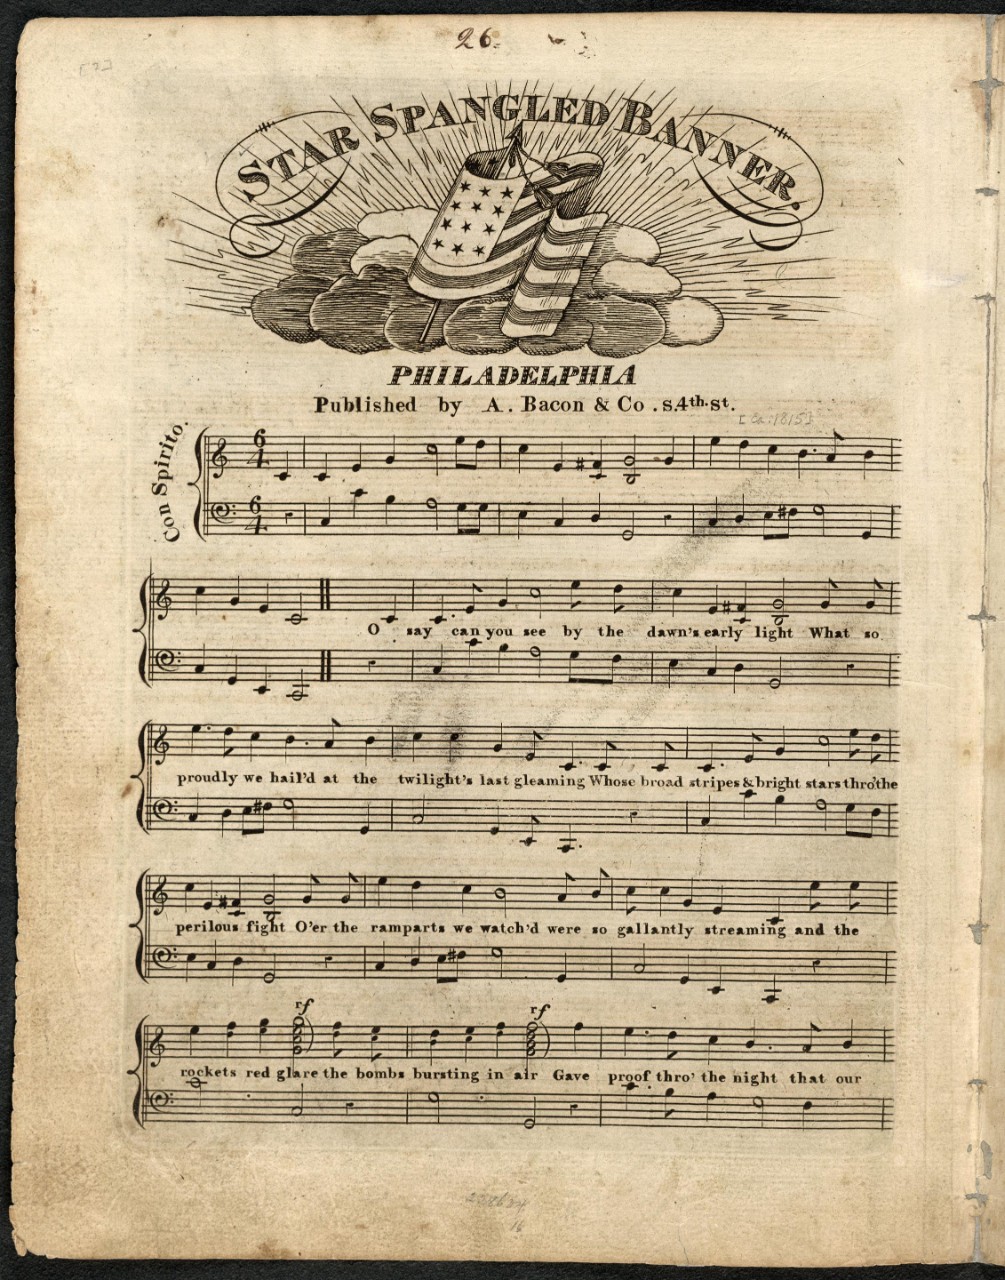 Star-Spangled Banner.   A. Bacon and Co., Philadelphia, PA, [ca. 1815].  Courtesy of the Library of Congress, M1630.3.S7M2.  